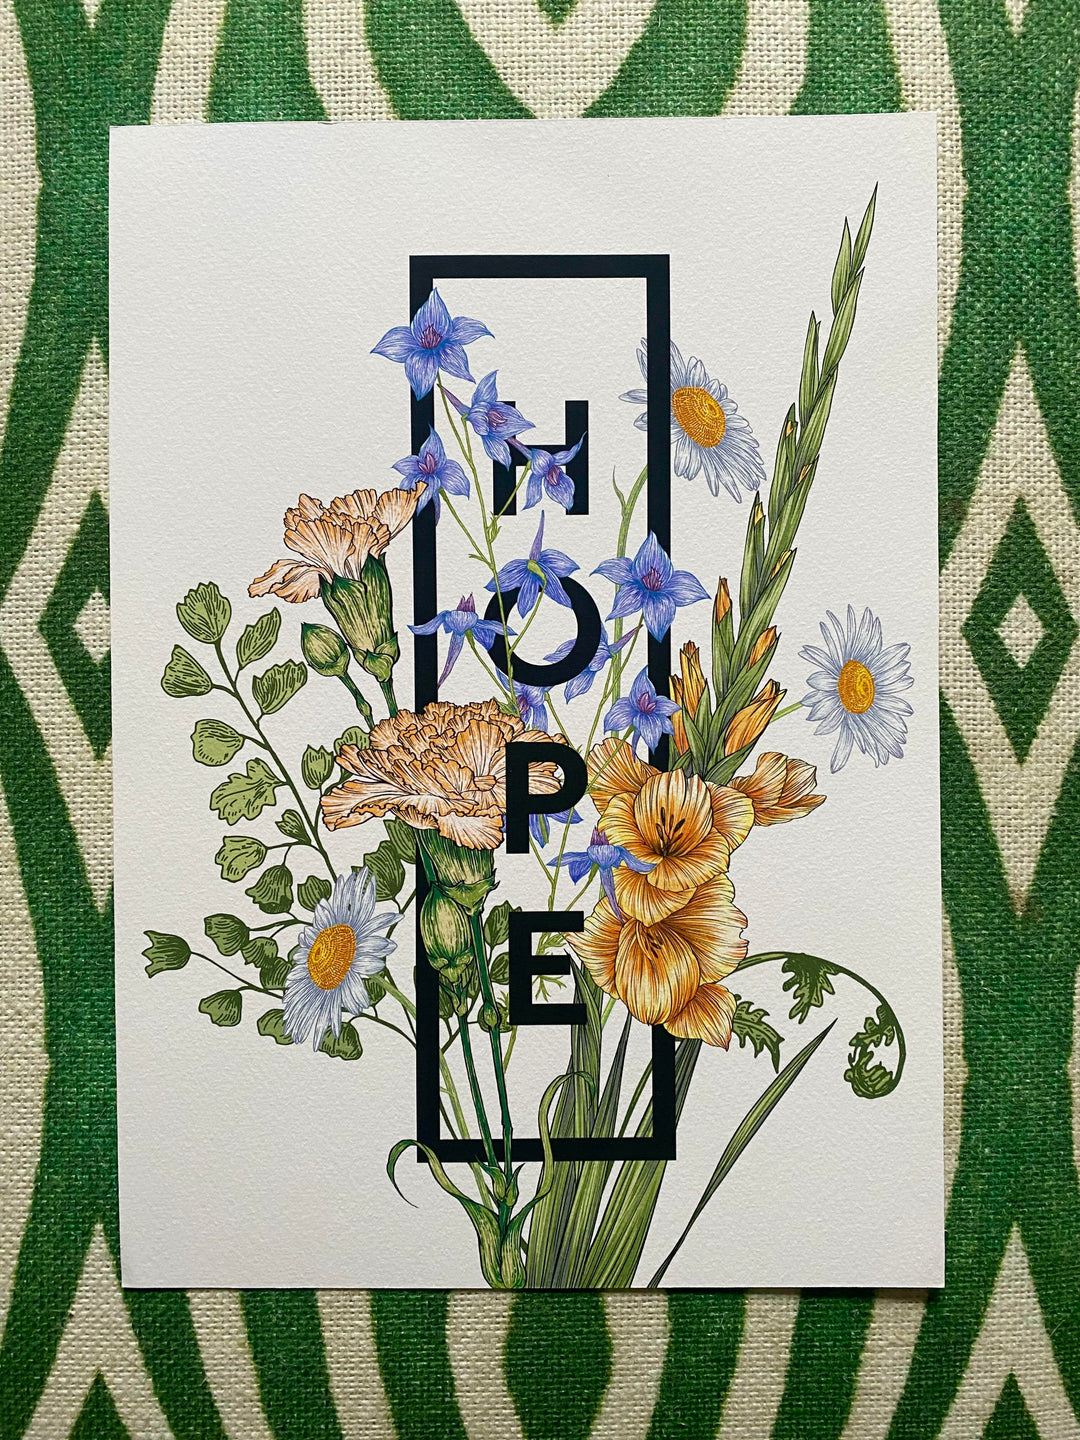 the-print-florist-hope-through-the-meadow-illustrated-art-print-inspirational-words